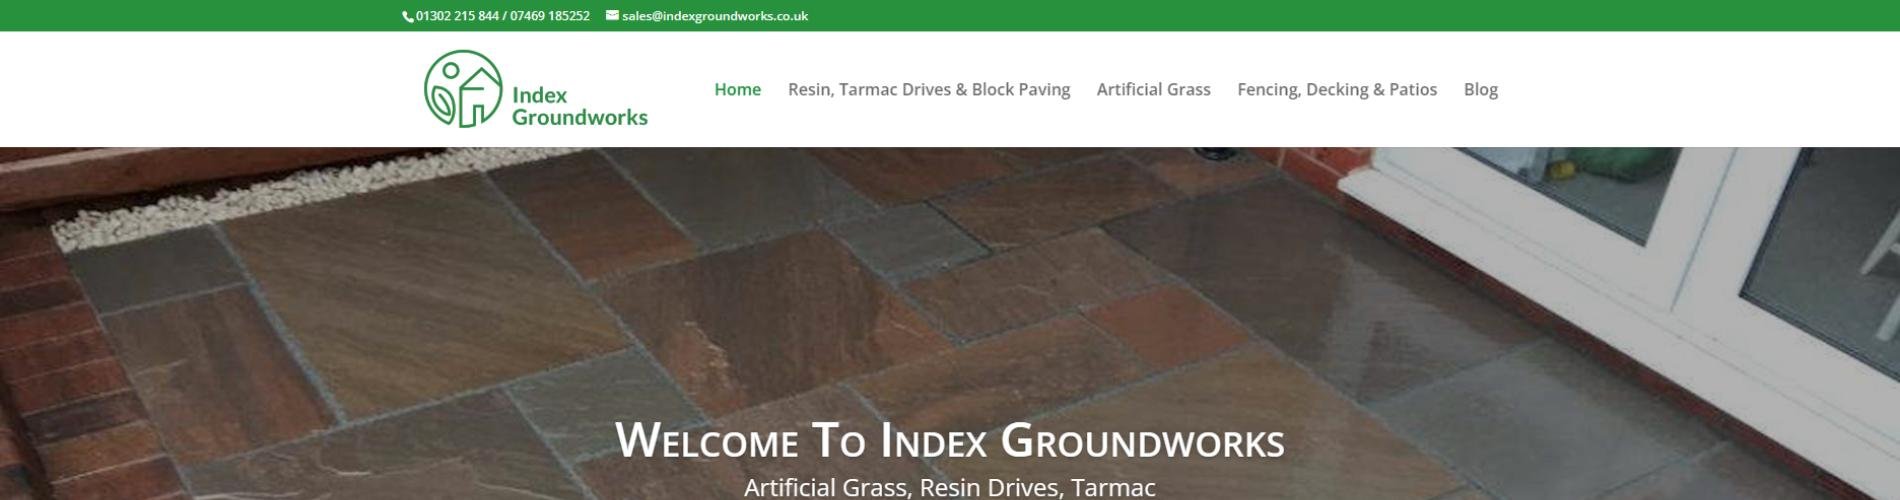 Index Groundworks cover